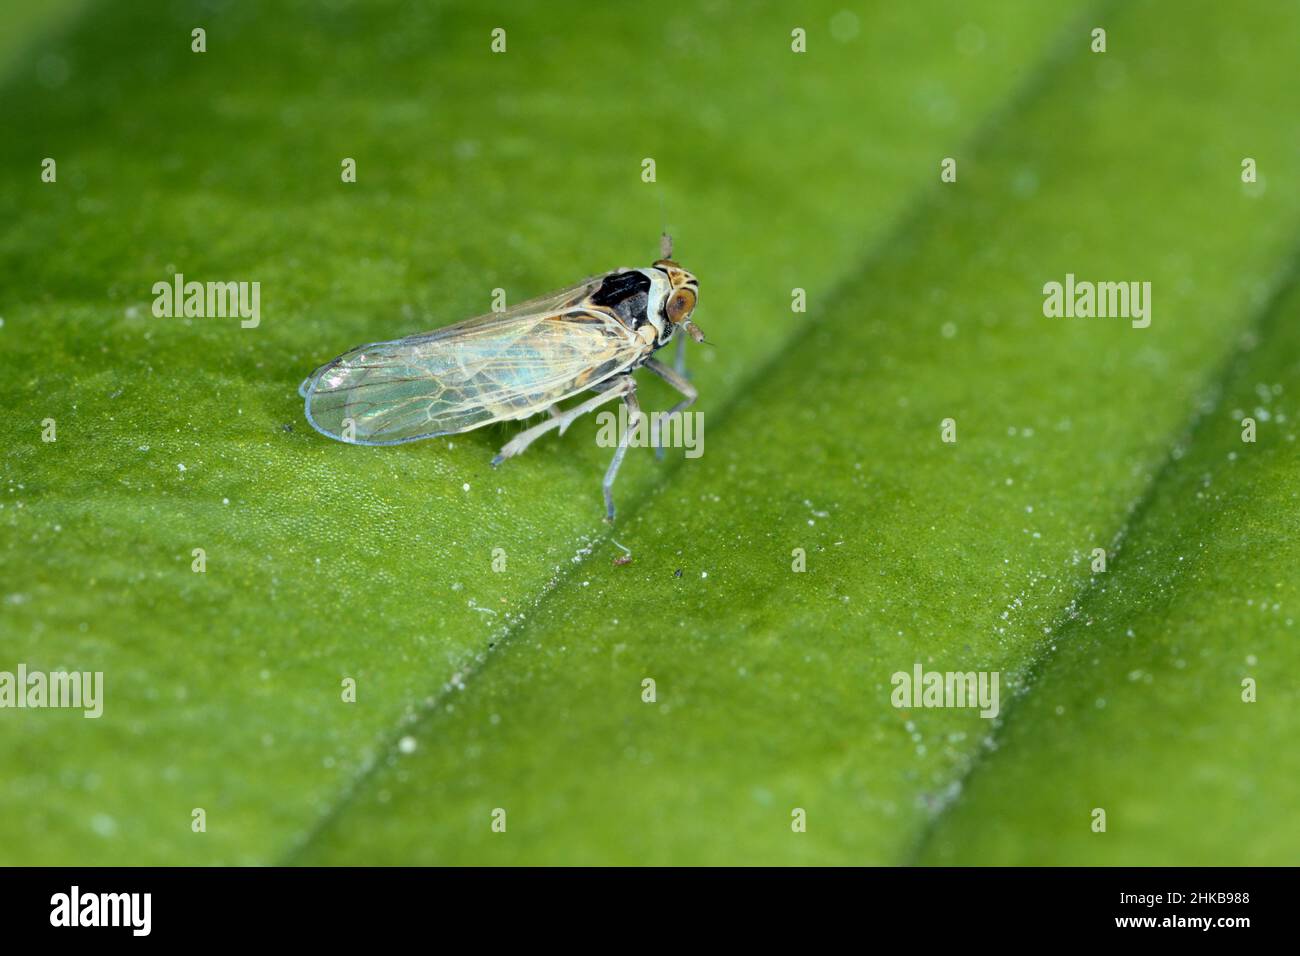 Male of Javesella pellucida is a planthopper from the family Delphacidae on leaf. Stock Photo